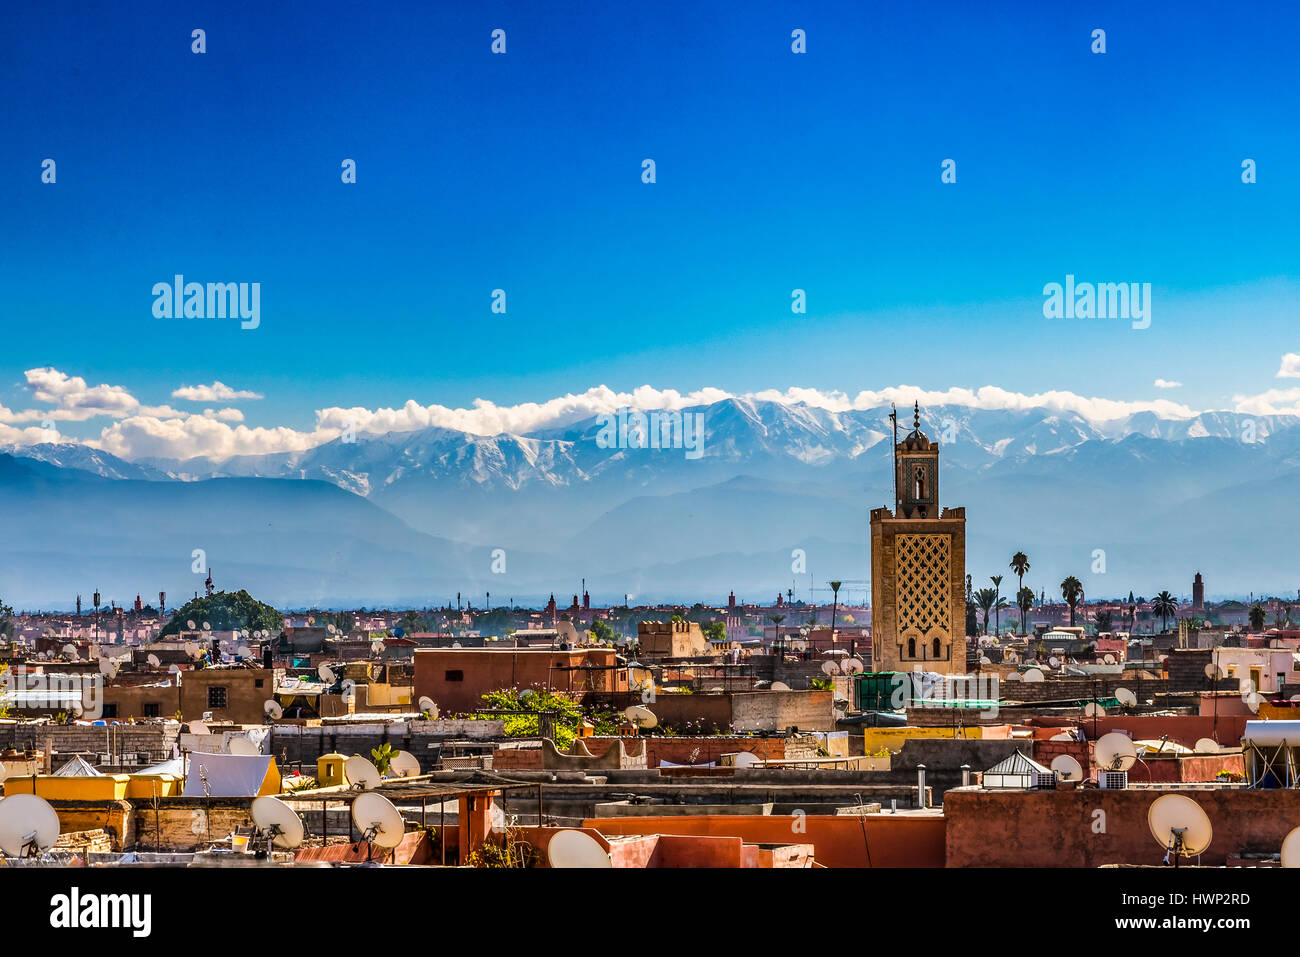 Roof tops of Marrakech, Morocco with Atlas mountains in the distance Stock Photo